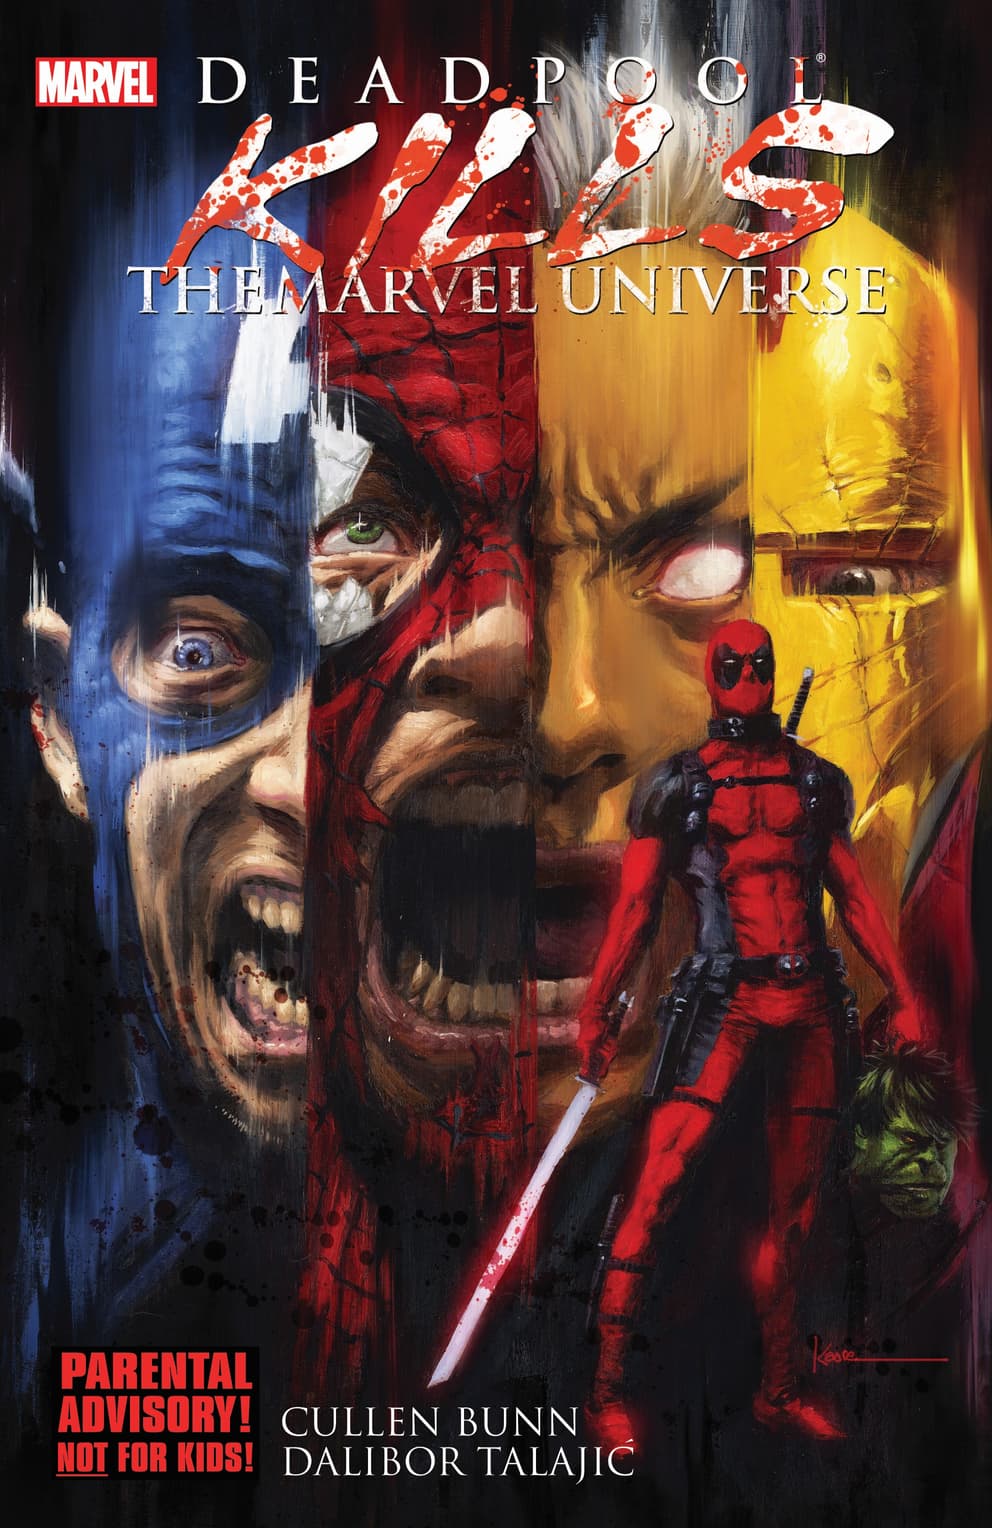 DEADPOOL KILLS THE MARVEL UNIVERSE cover by Kaare Andrews